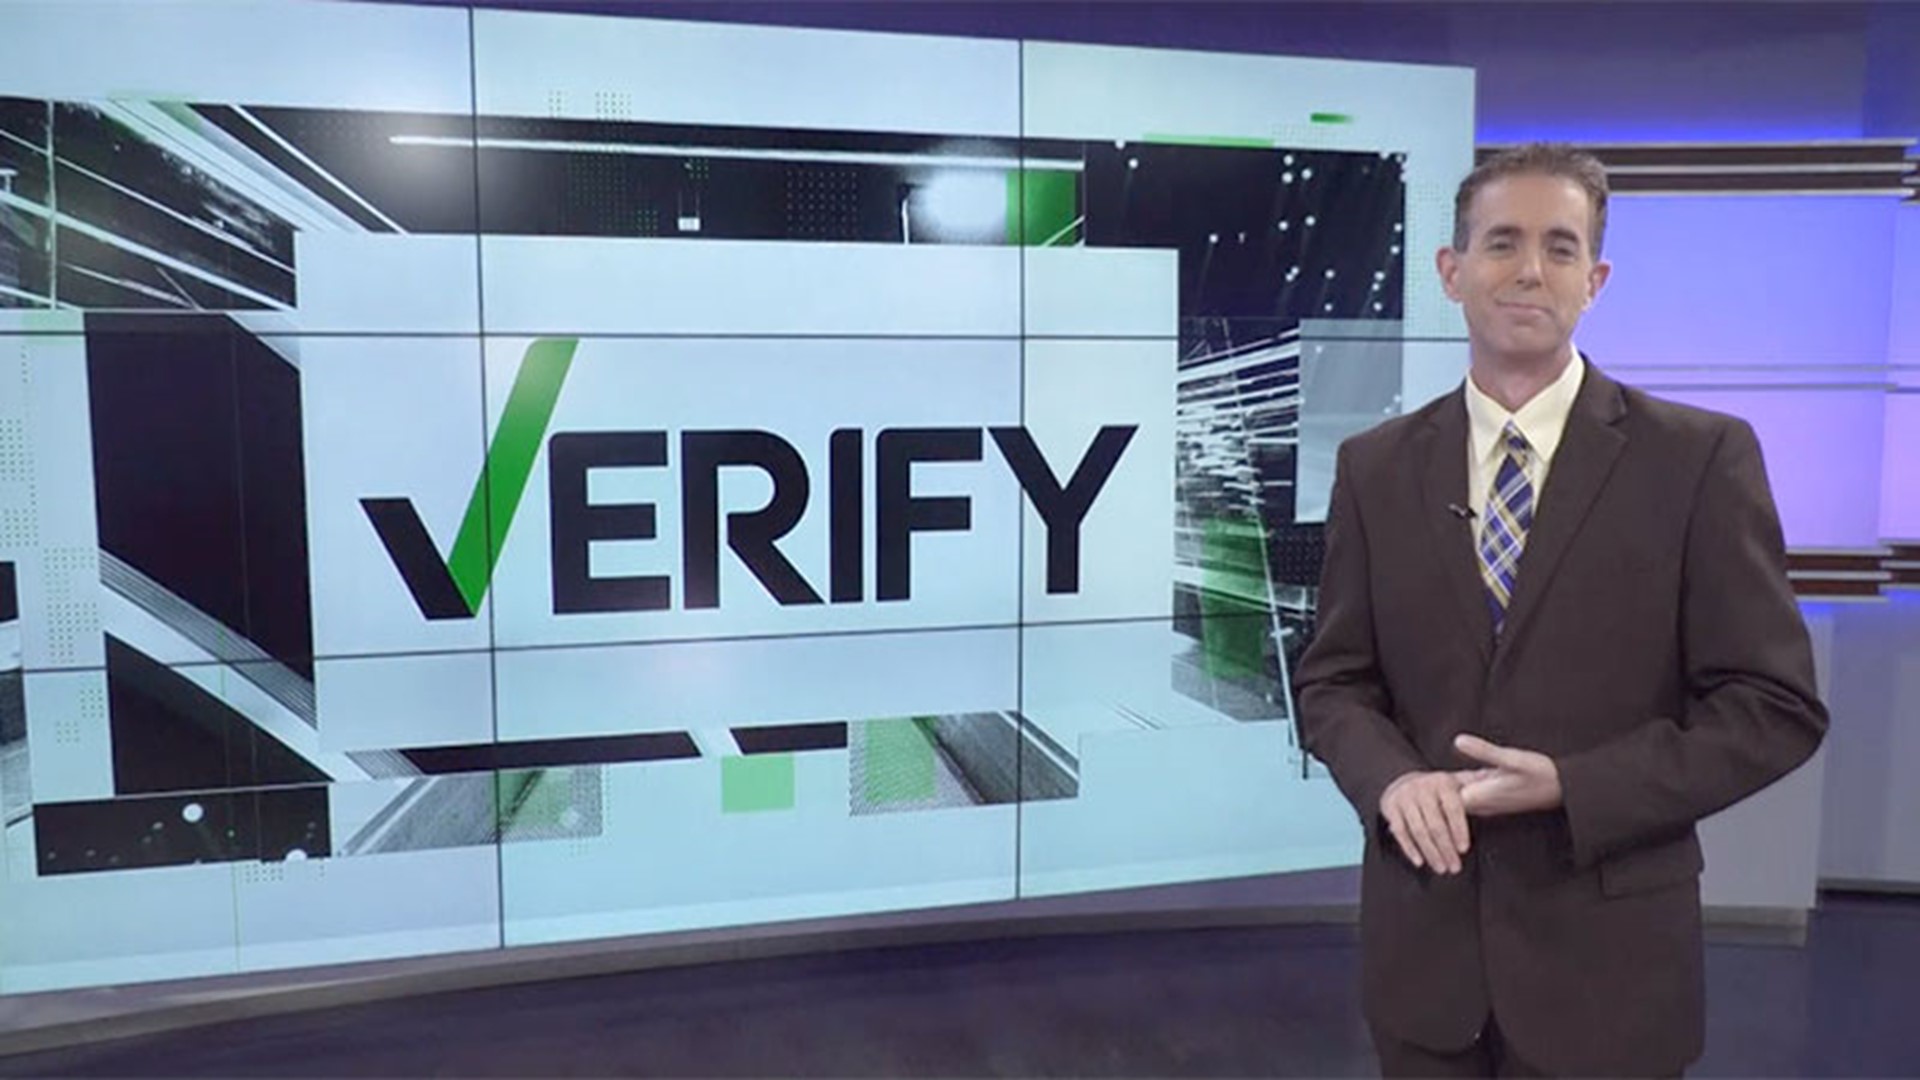 We know it can be hard to spot misinformation, so the VERIFY team is here to help. Want something verified? Email your questions to verify@kens5.com.